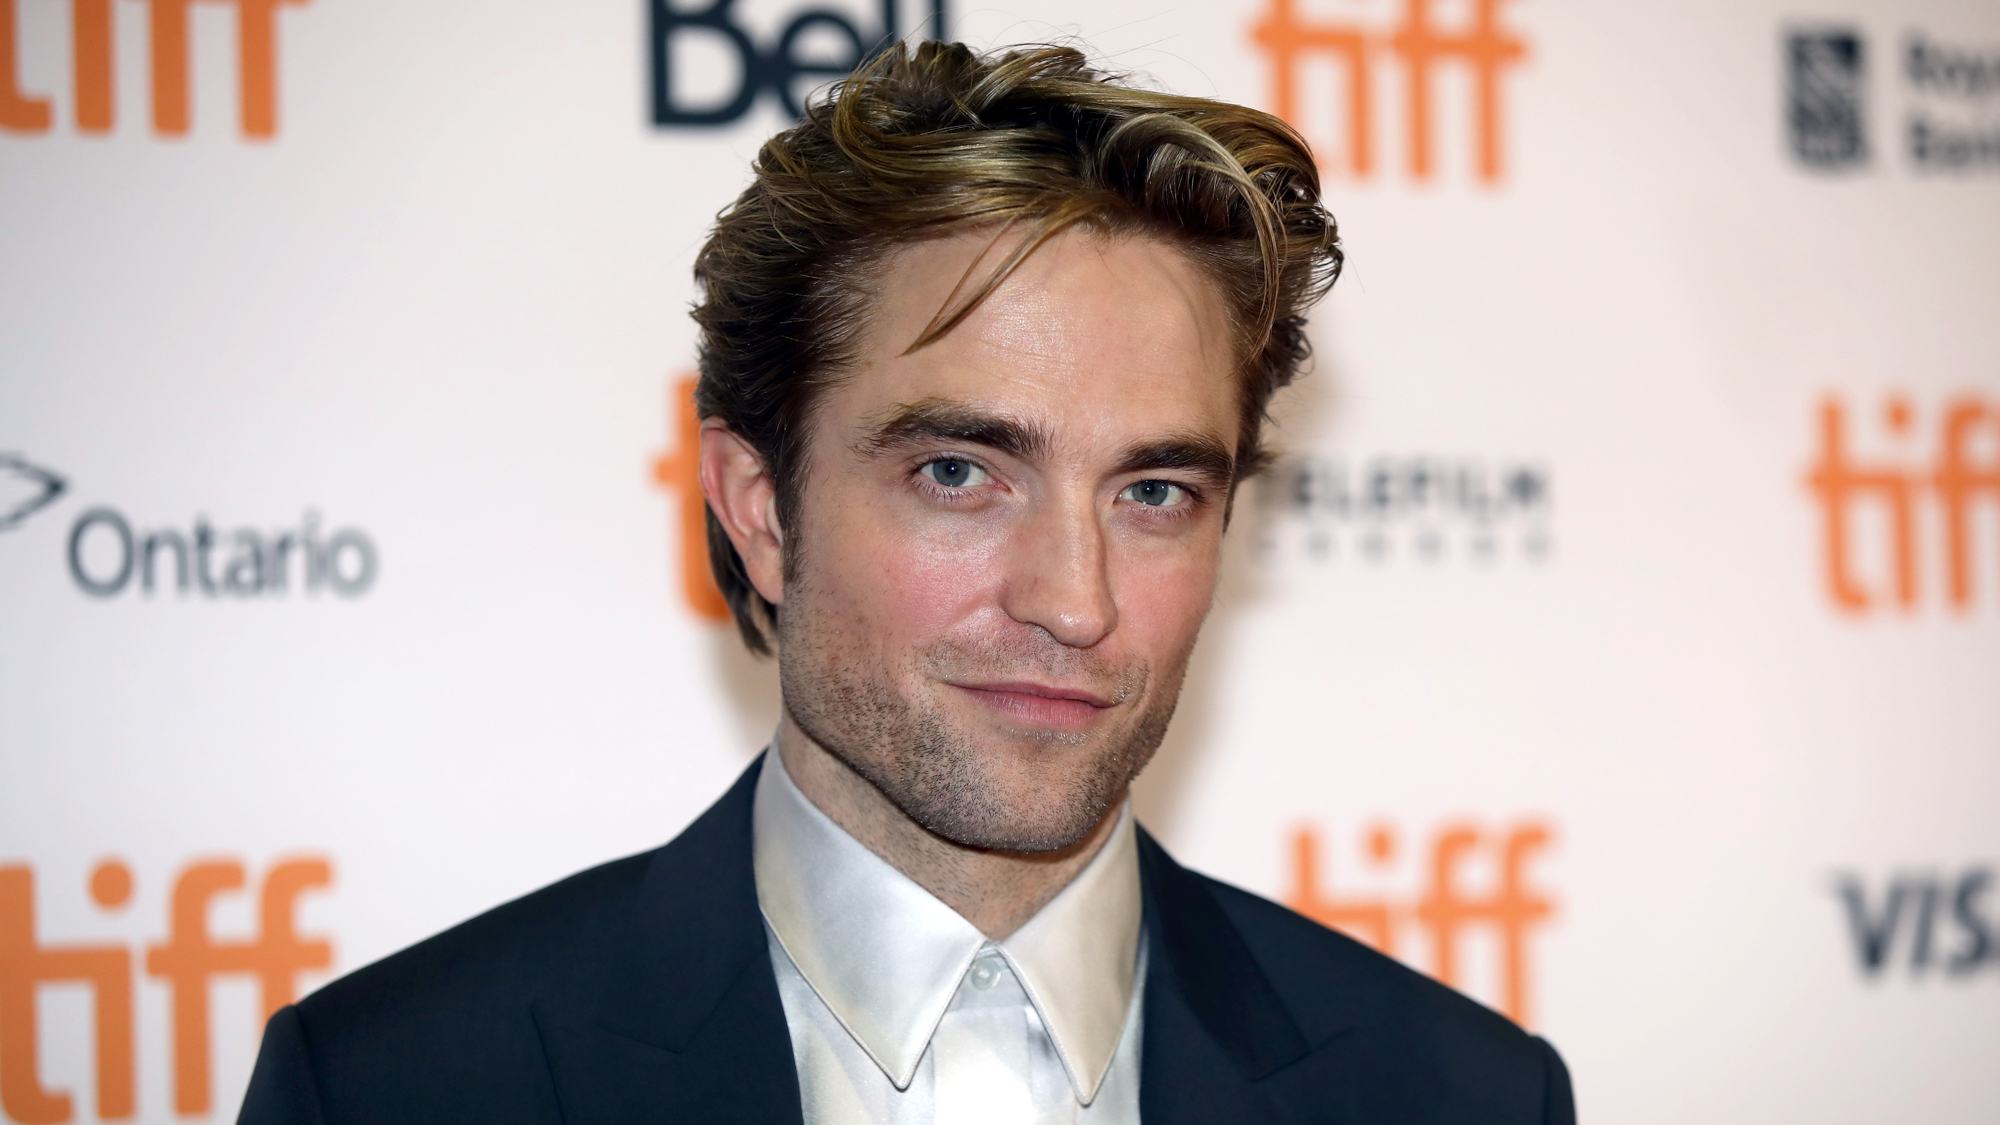 Robert Pattinson attends "The Lighthouse" premiere during the 2019 Toronto International Film Festival at Ryerson Theatre on September 07, 2019 in Toronto, Canada.